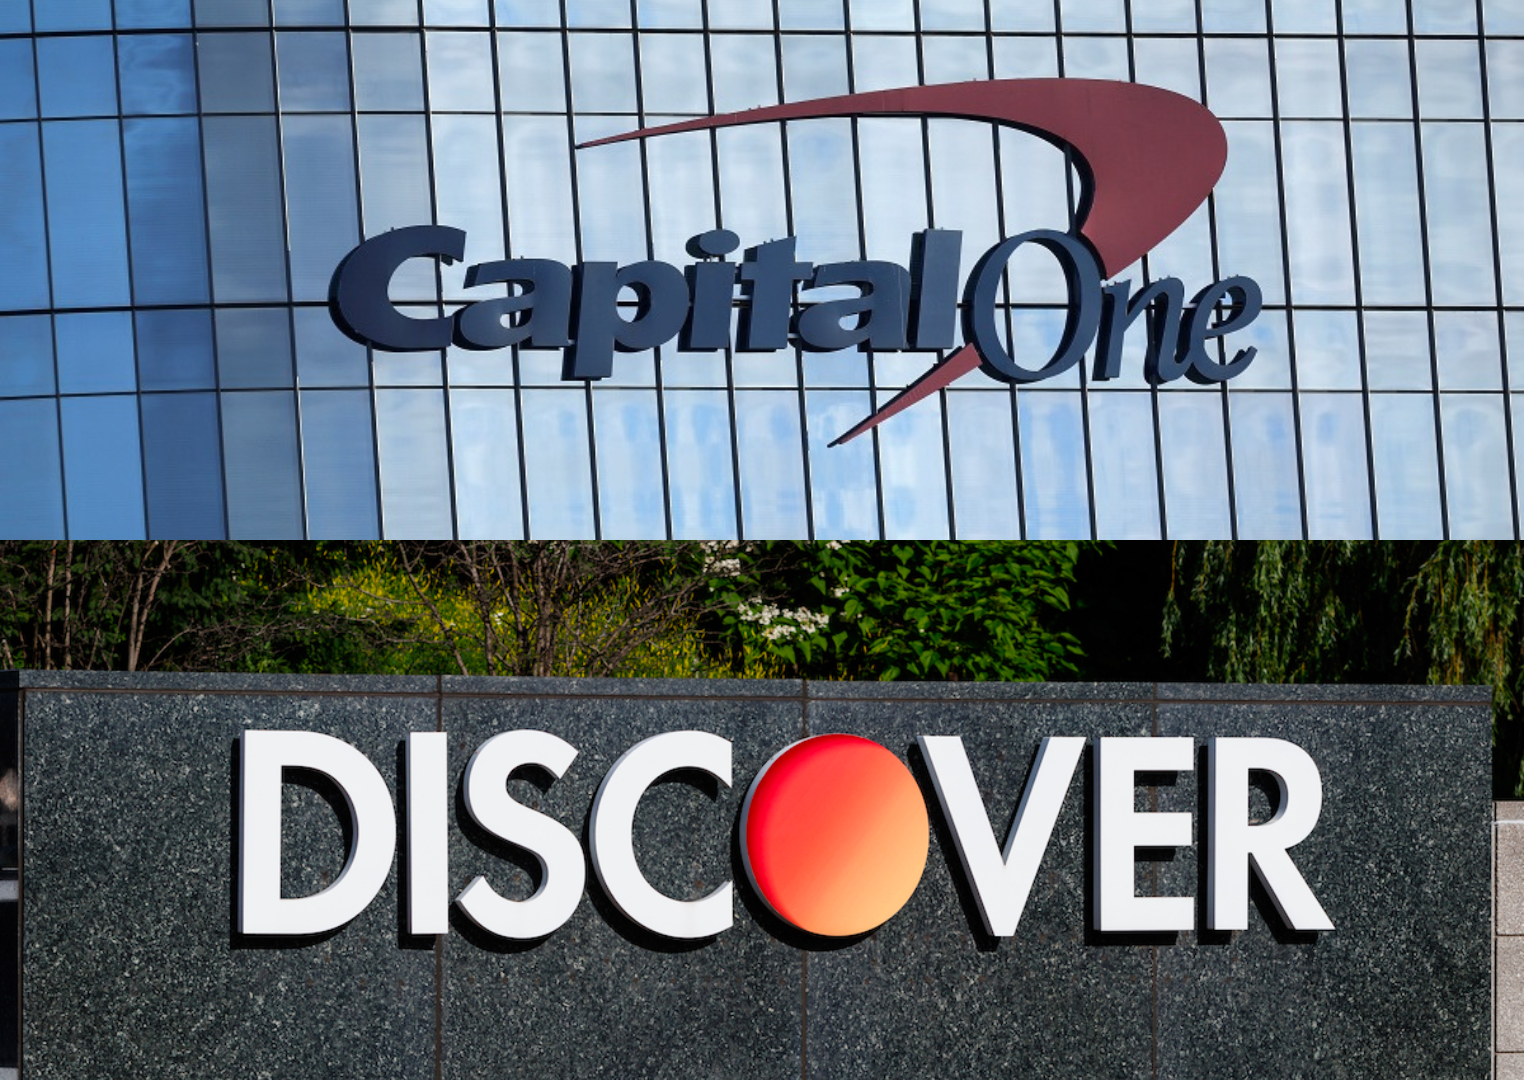 Capital One's Bold Move: Acquiring Discover to Reinvent the Payments Landscape